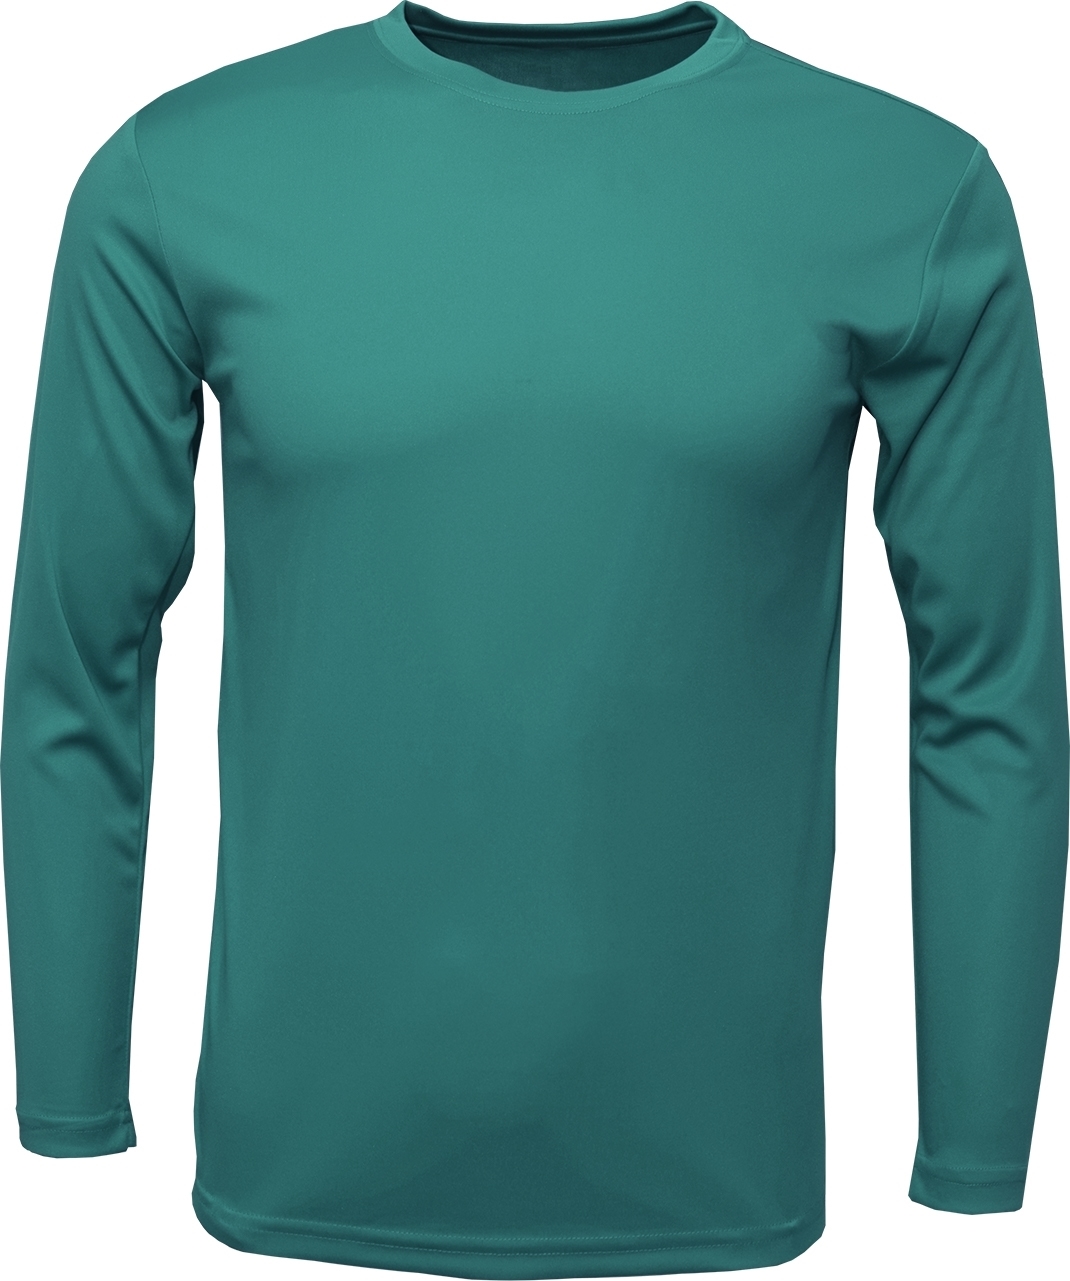 click to view TEAL